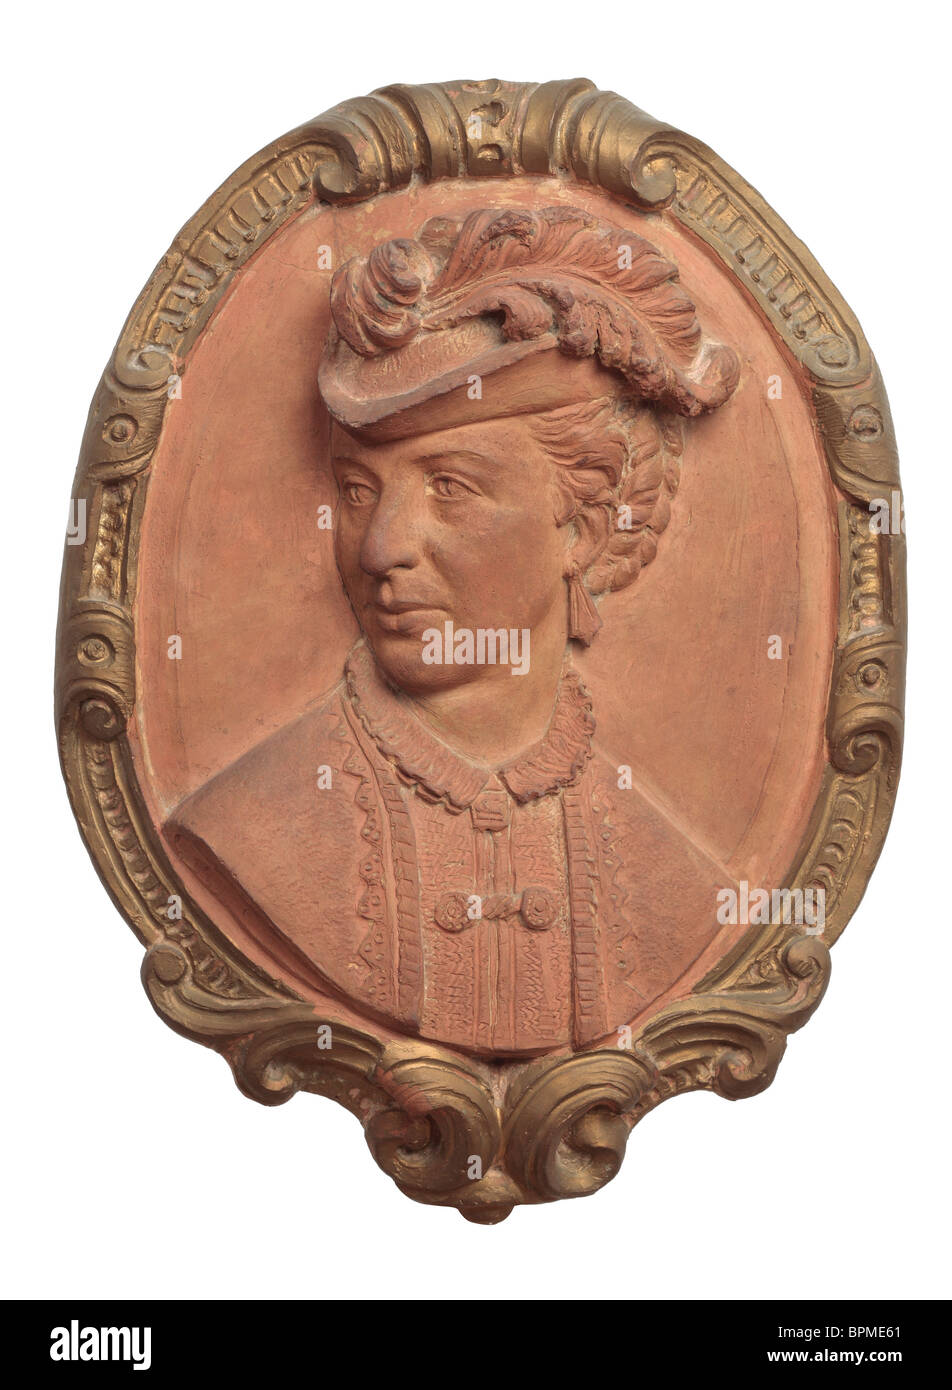 19th Century Terra Cotta Clay Cameo of a Woman's Head by the Sculptor Leo Stracké Stock Photo